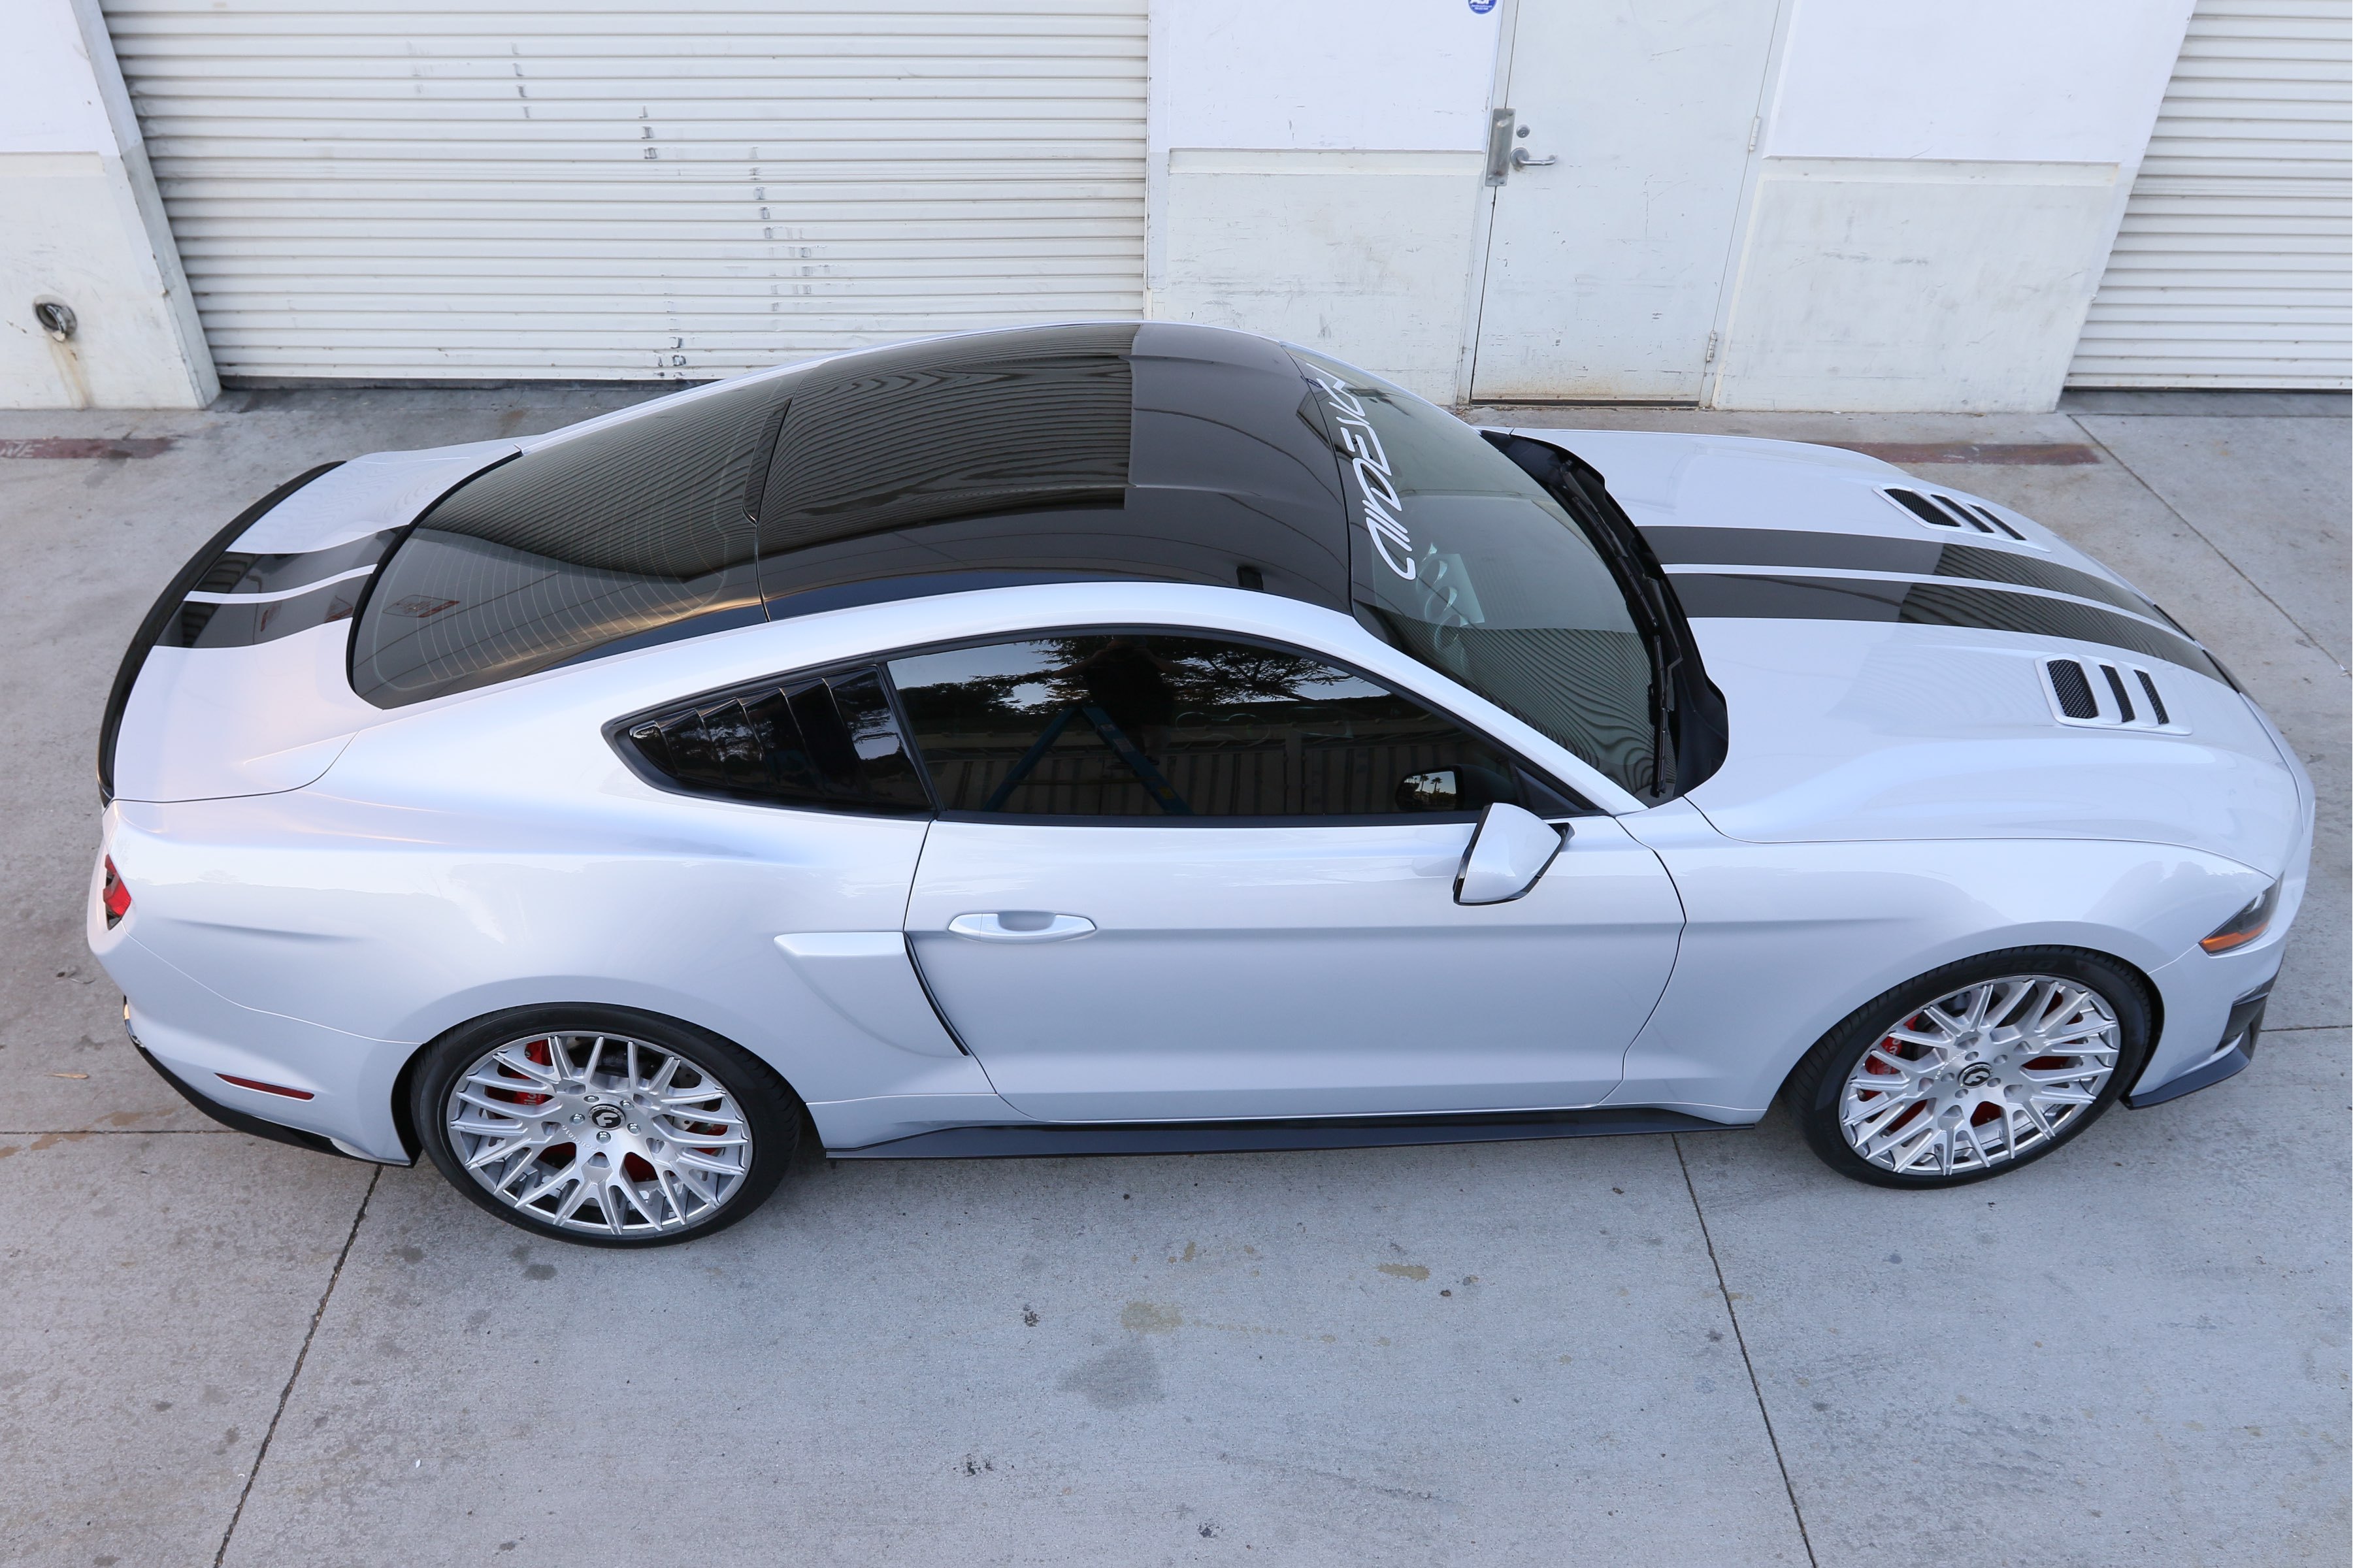 Gray Ford Mustang with Aftermarket Side Scoops - Photo by Air Design USA